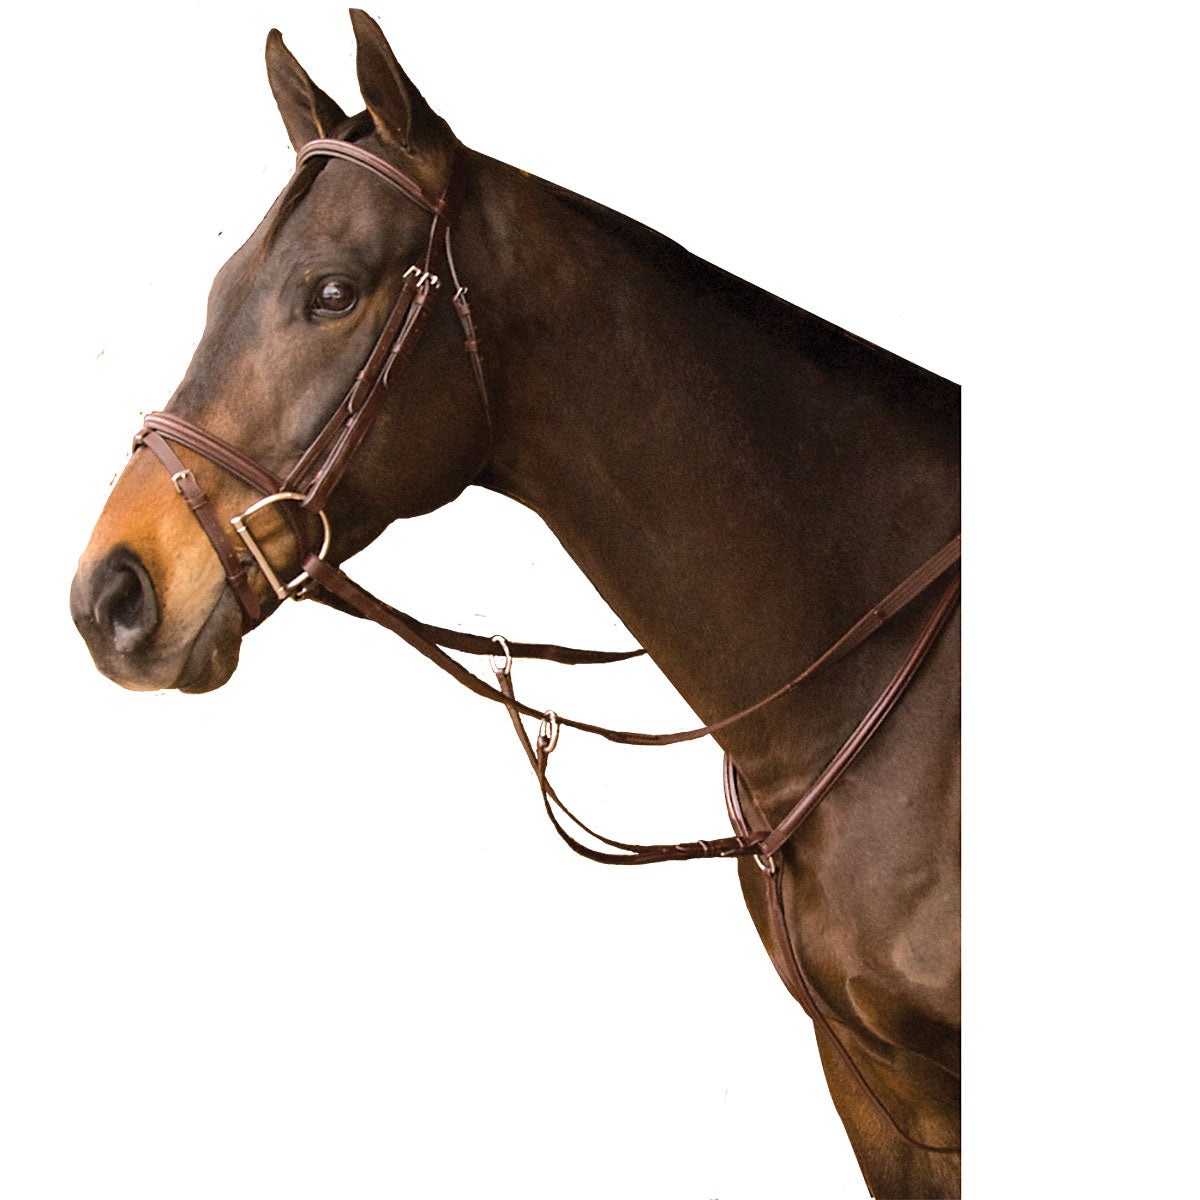 exselle event plain raised padded bridle and laced reins with flash